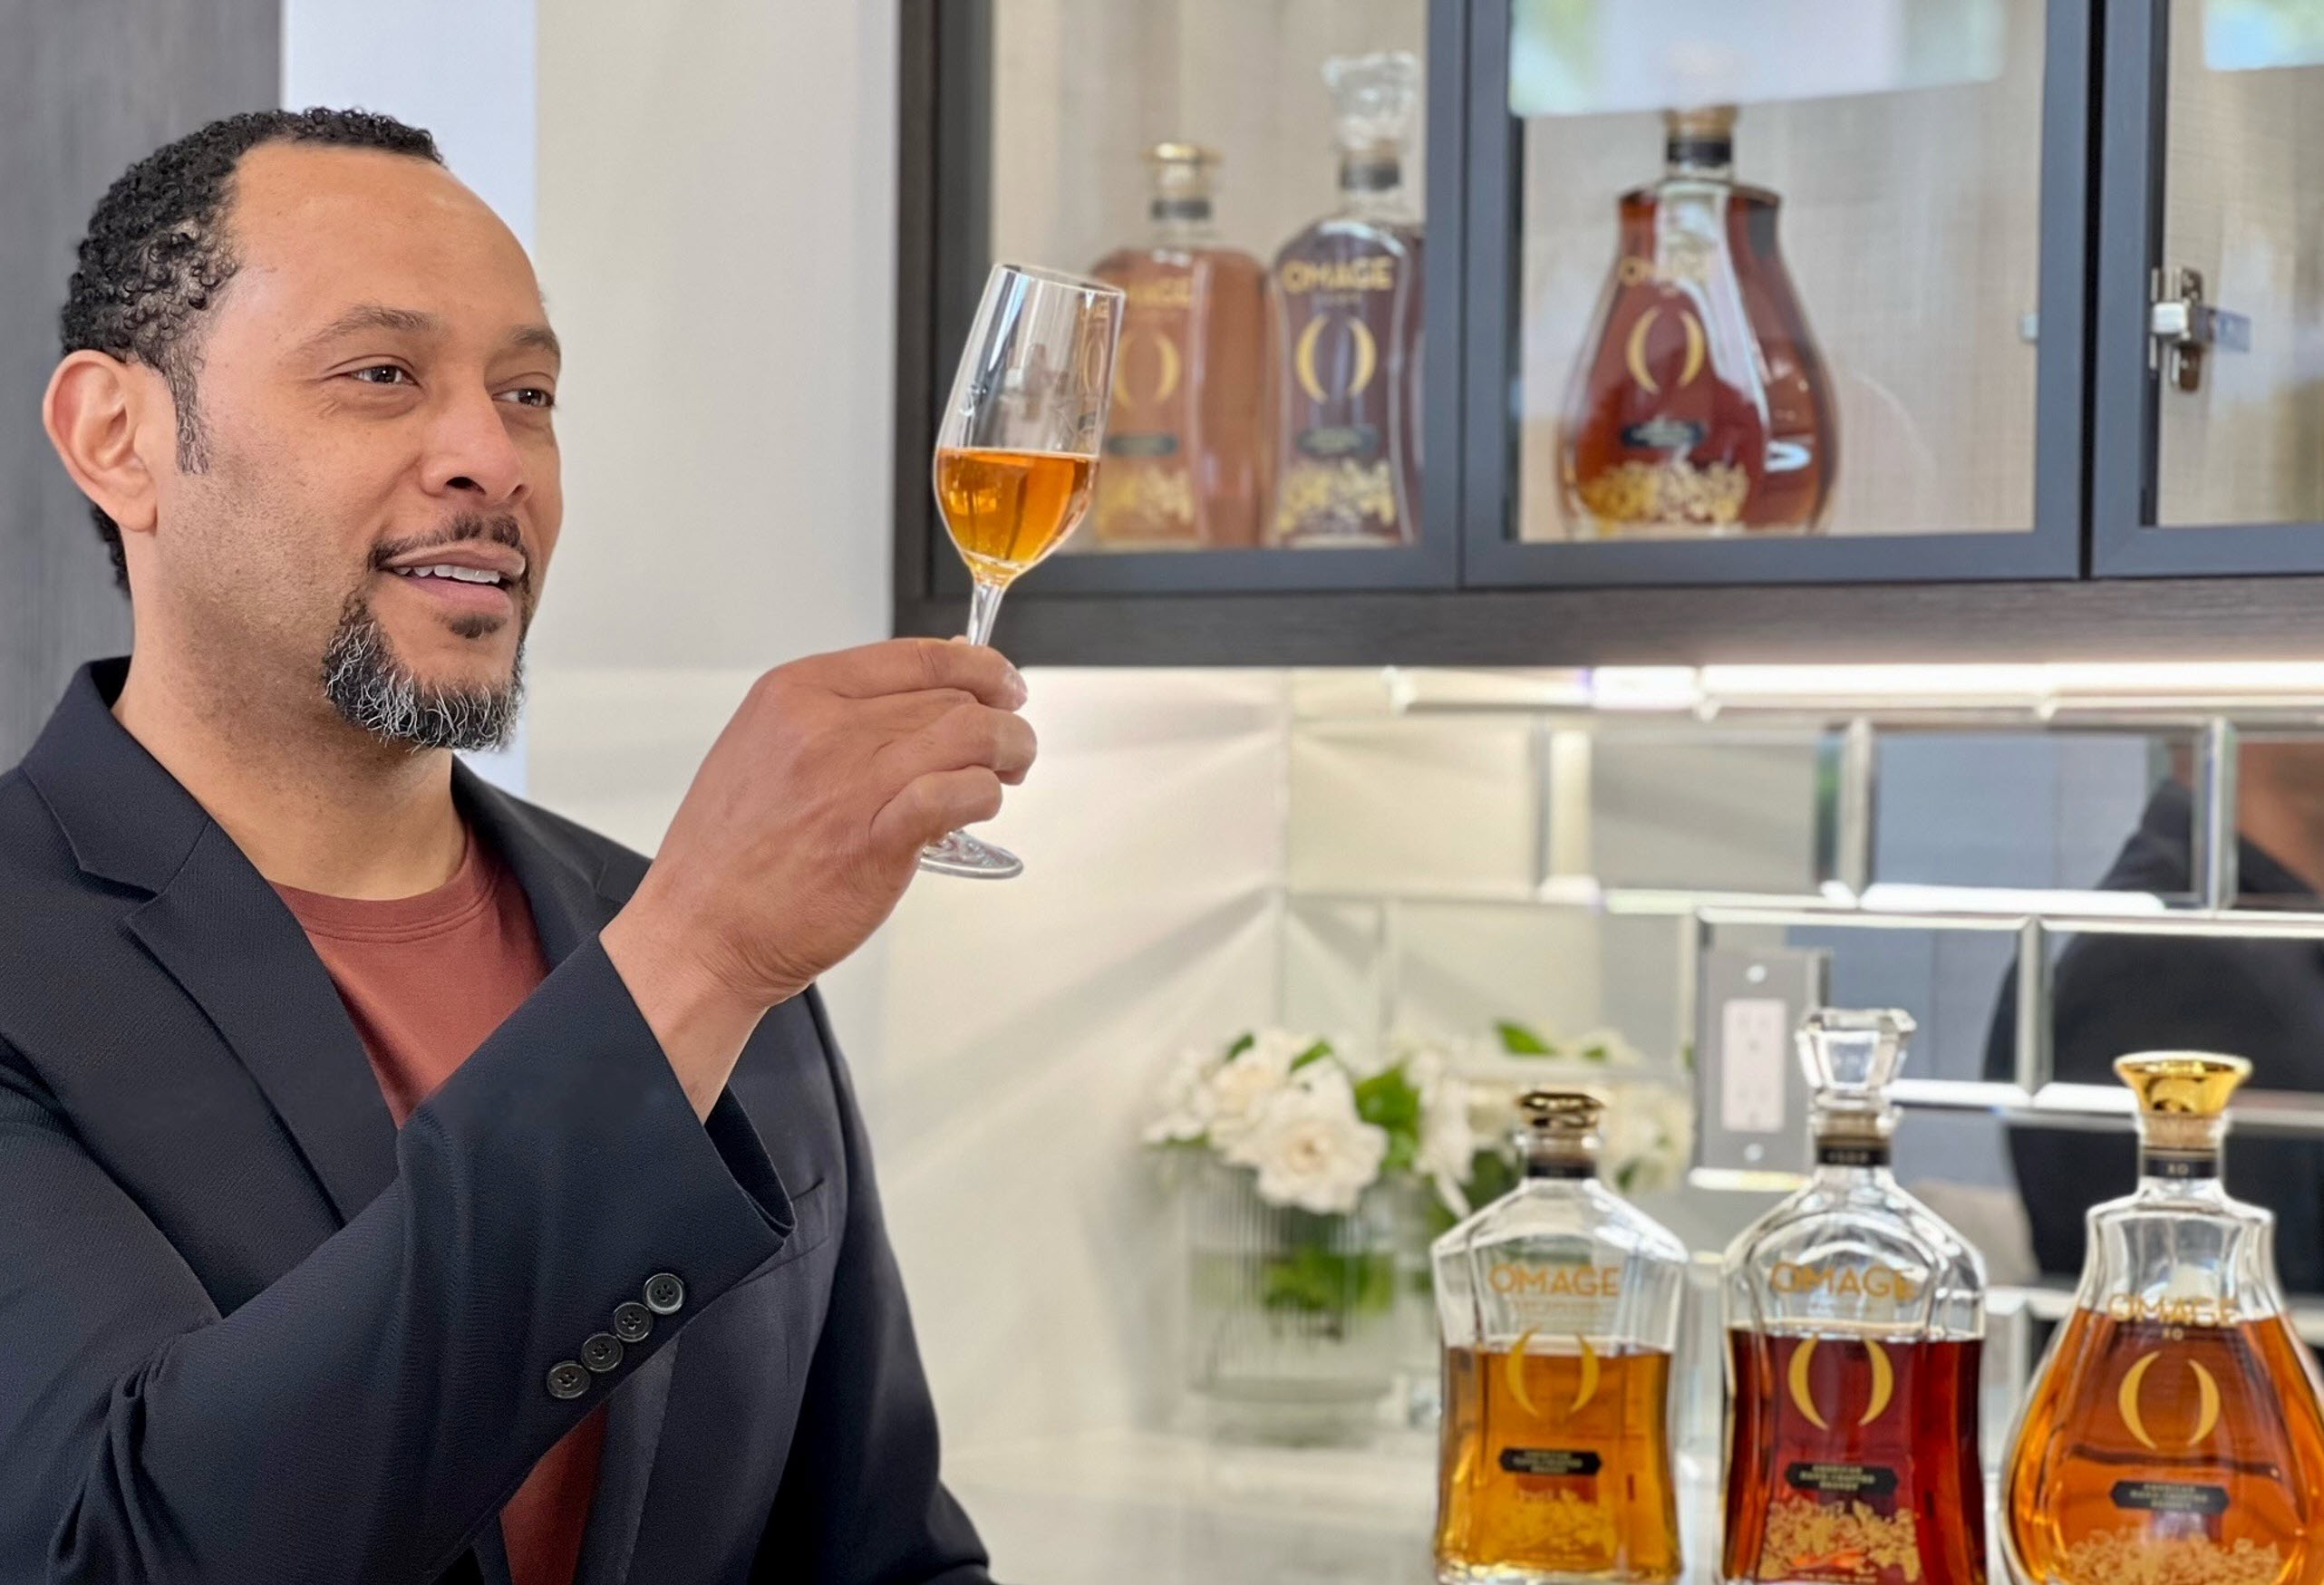 The Brand House Groups OMAGE - American Brandy